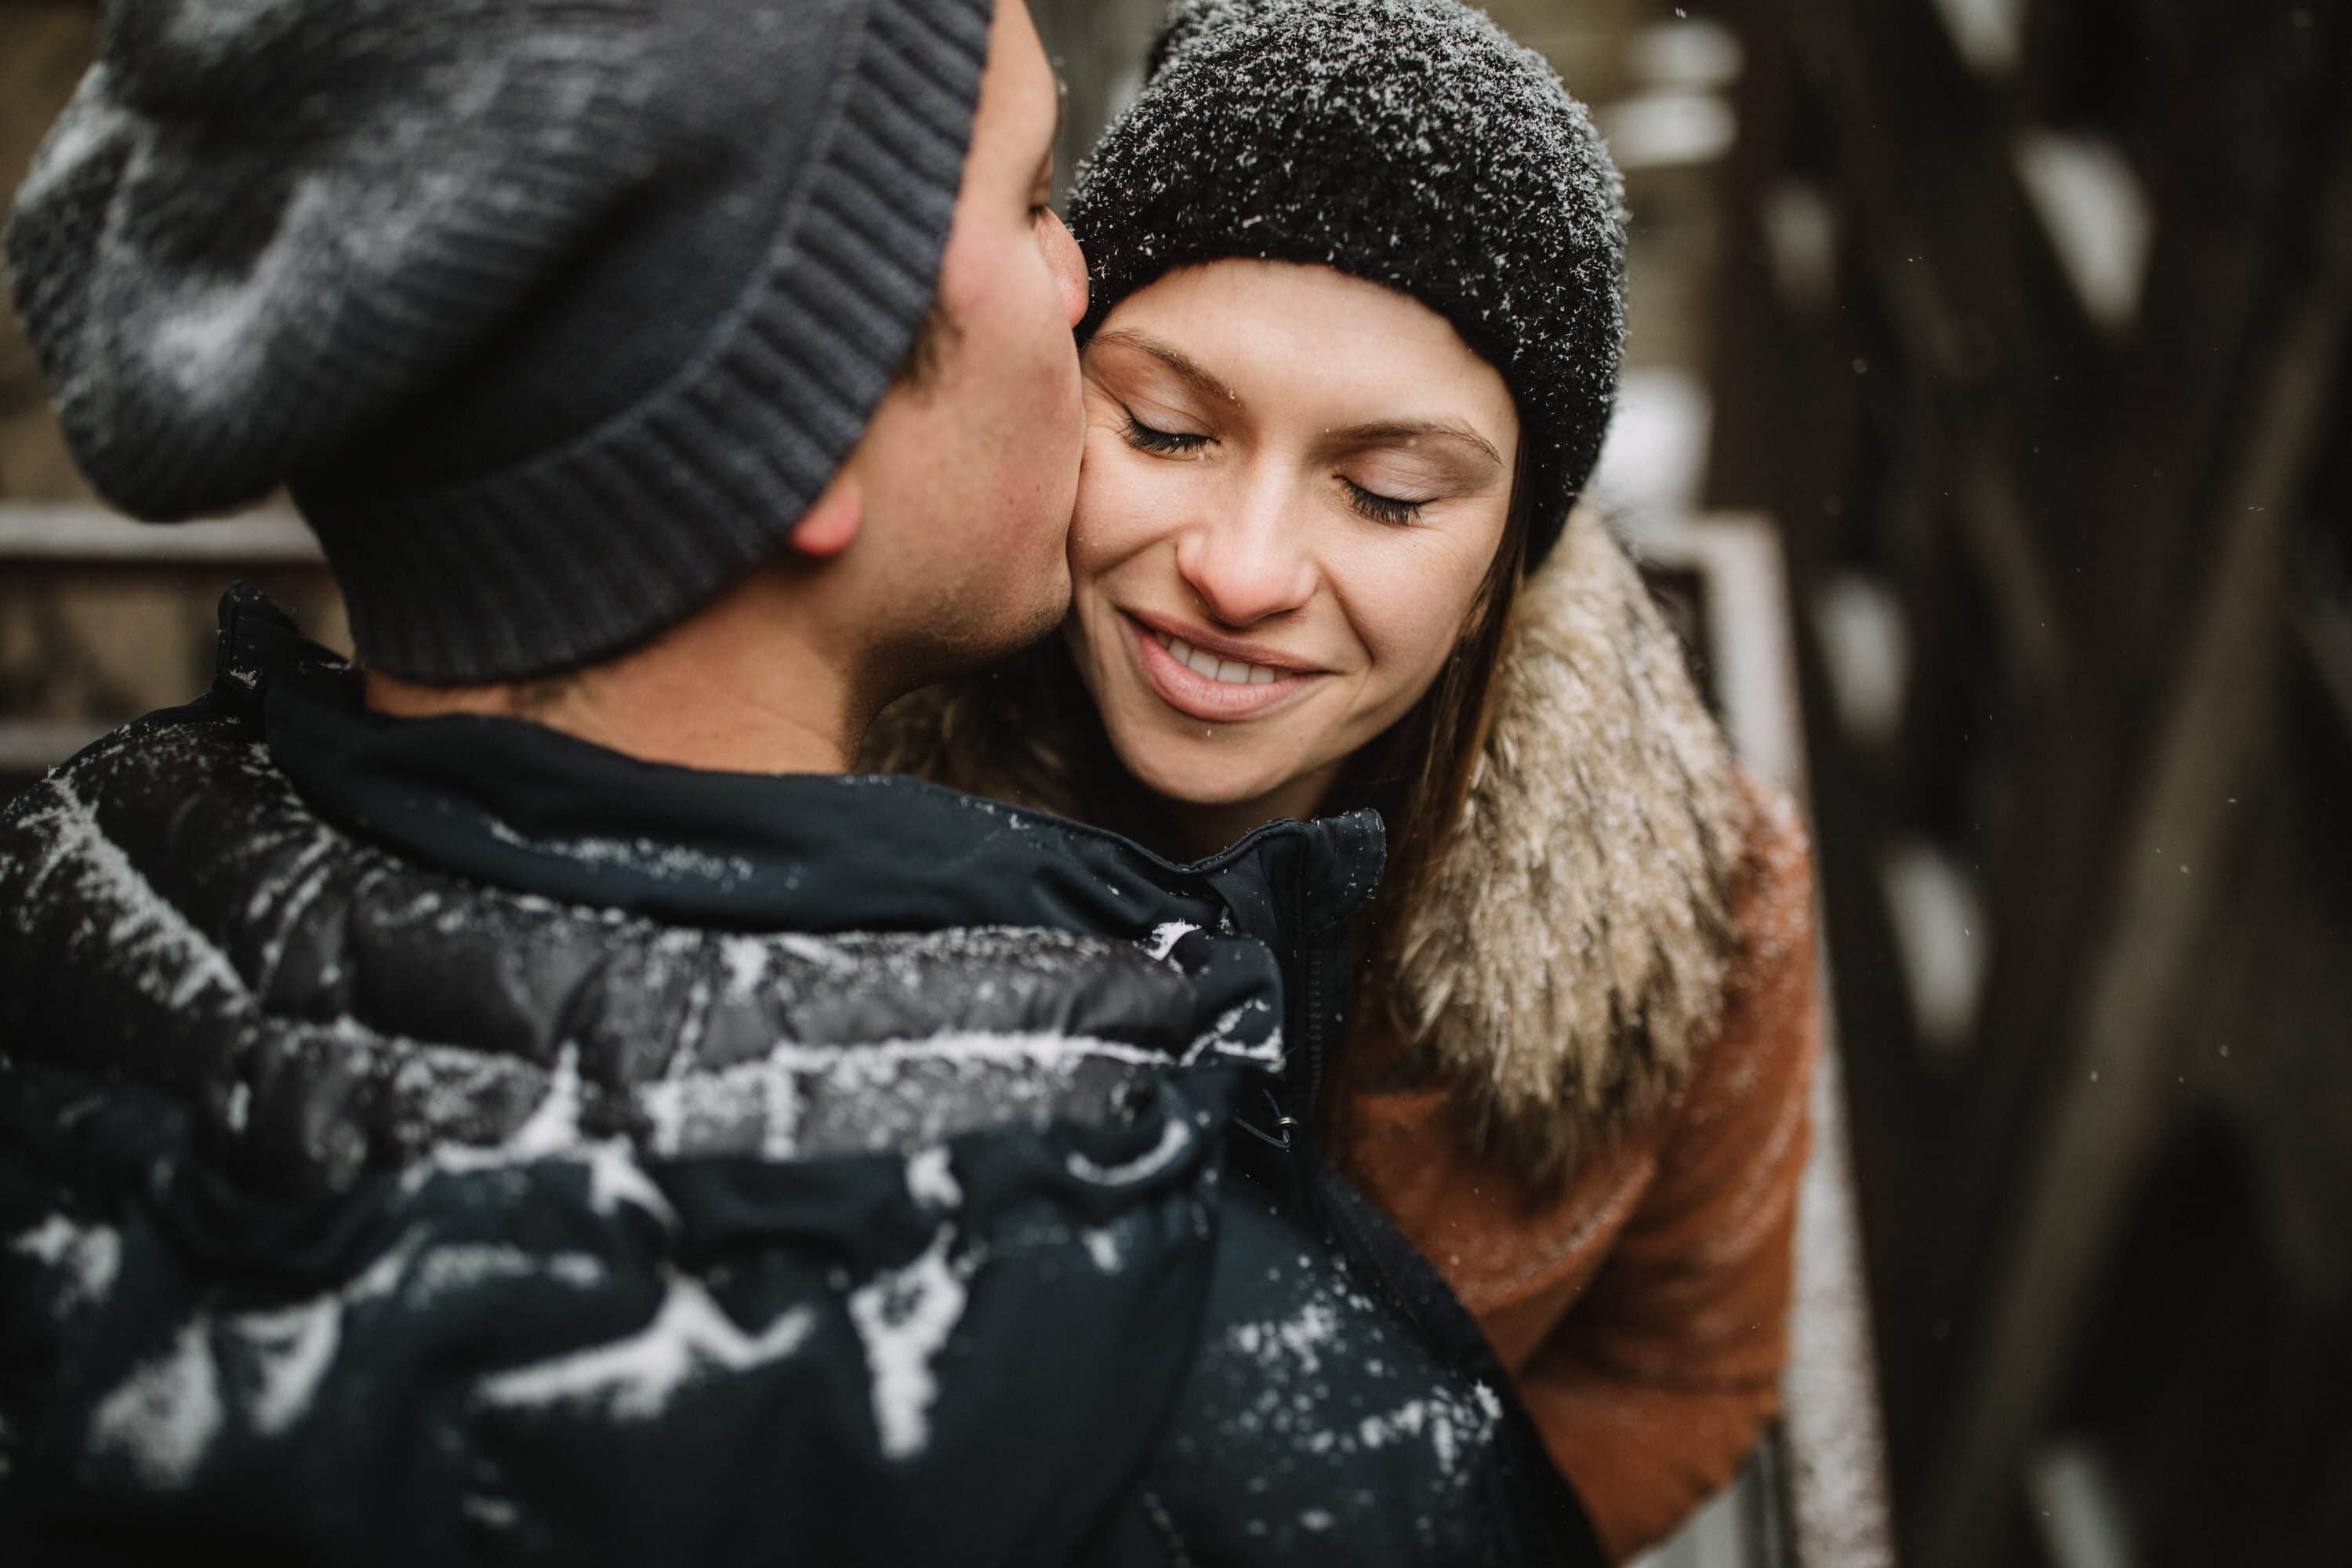 Snowy Urban engagement session in old port Montreal with Montreal photographer Brent Calis.